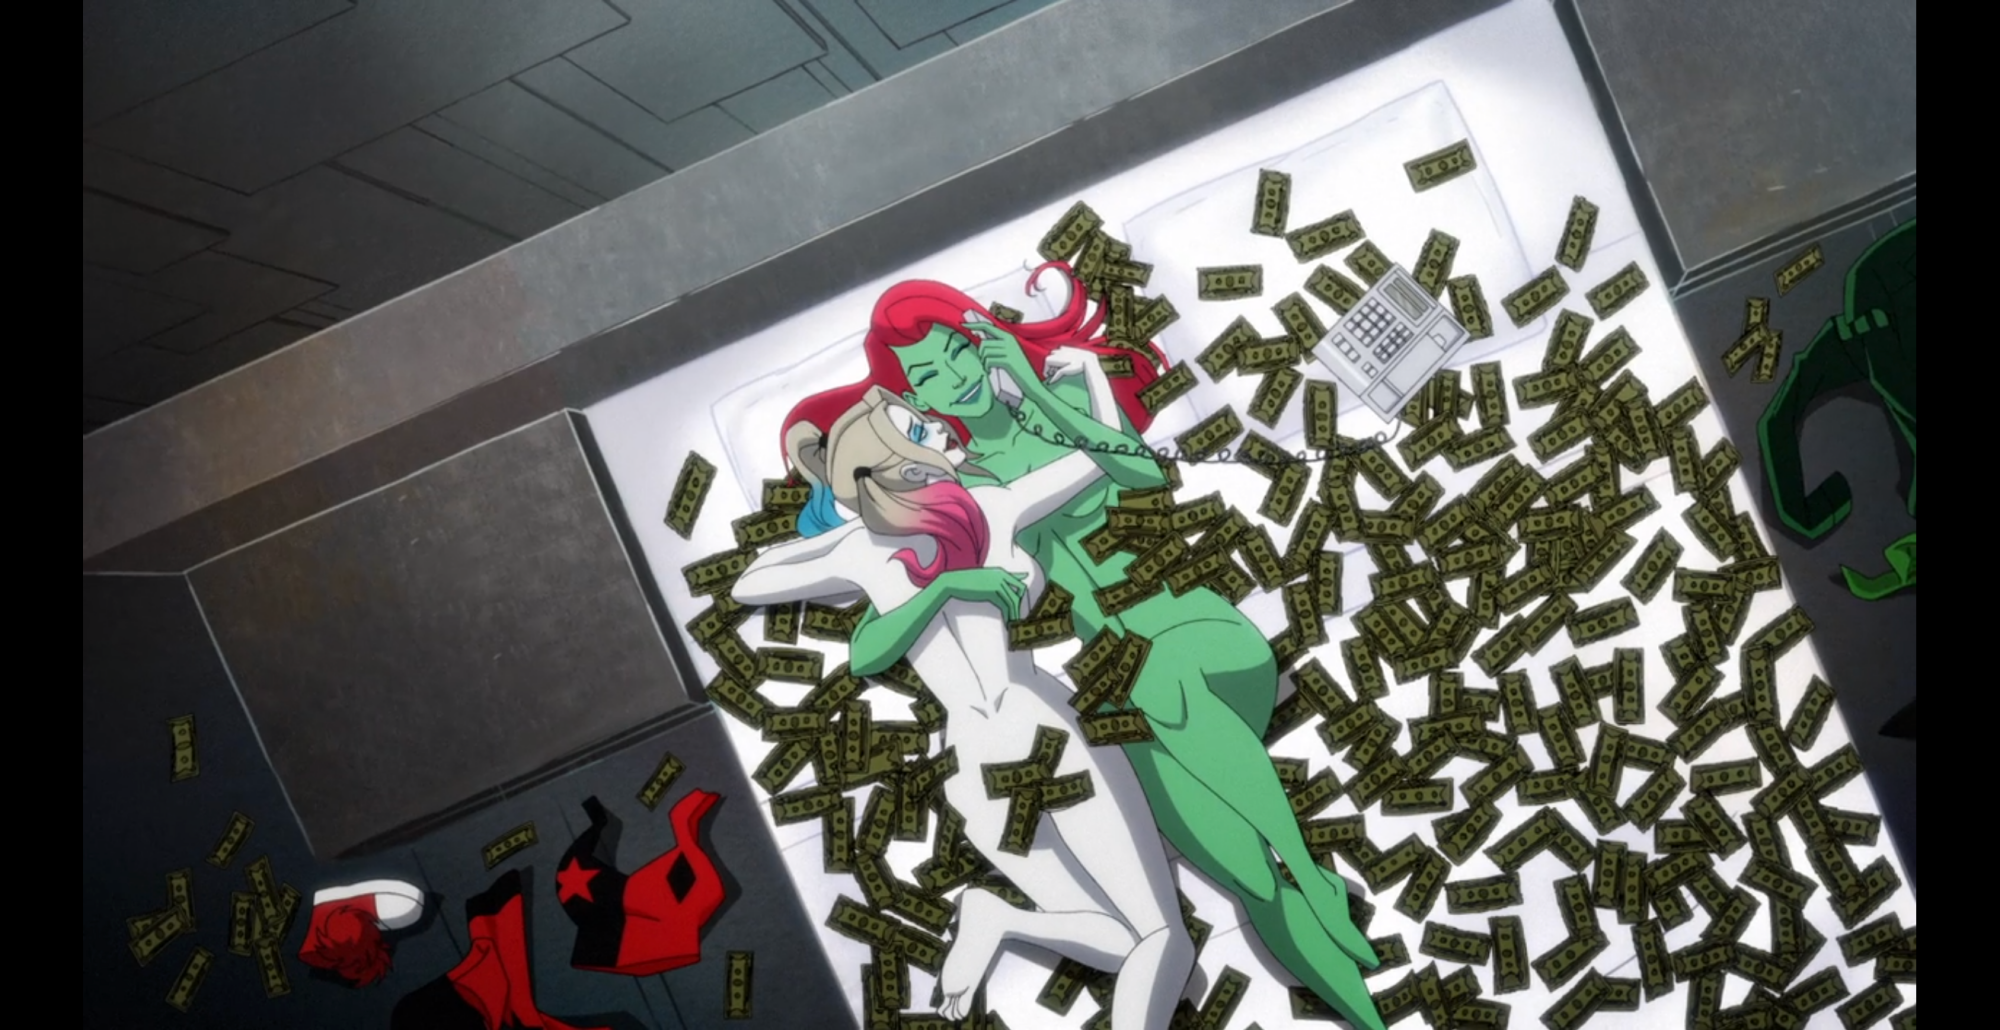 Harley Quinn and Poison Ivy share a bed in Season 3 of the HBO Max animated series "Harley Quinn"